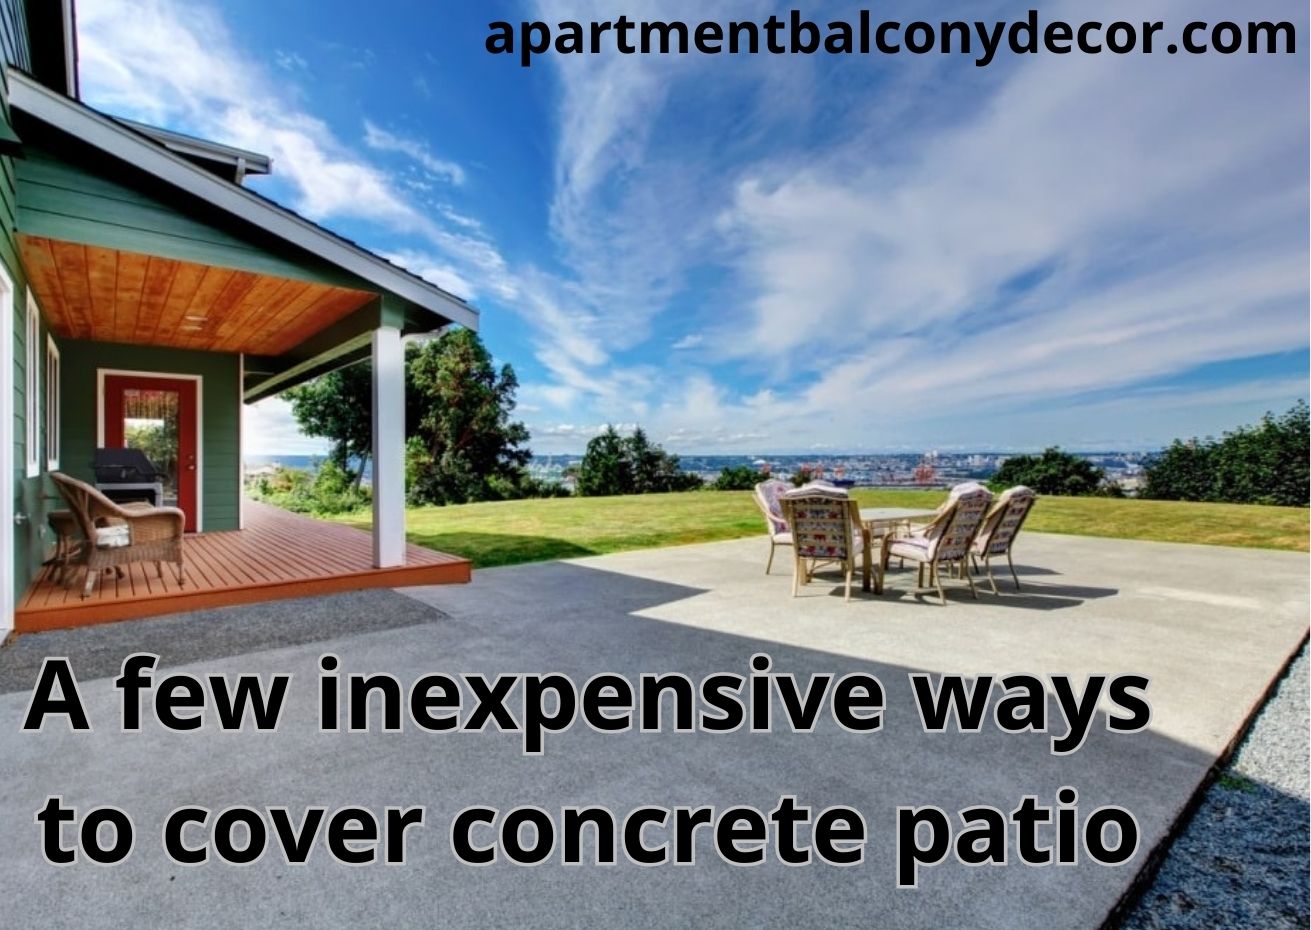 8 inexpensive ways to cover concrete patio: best solutions